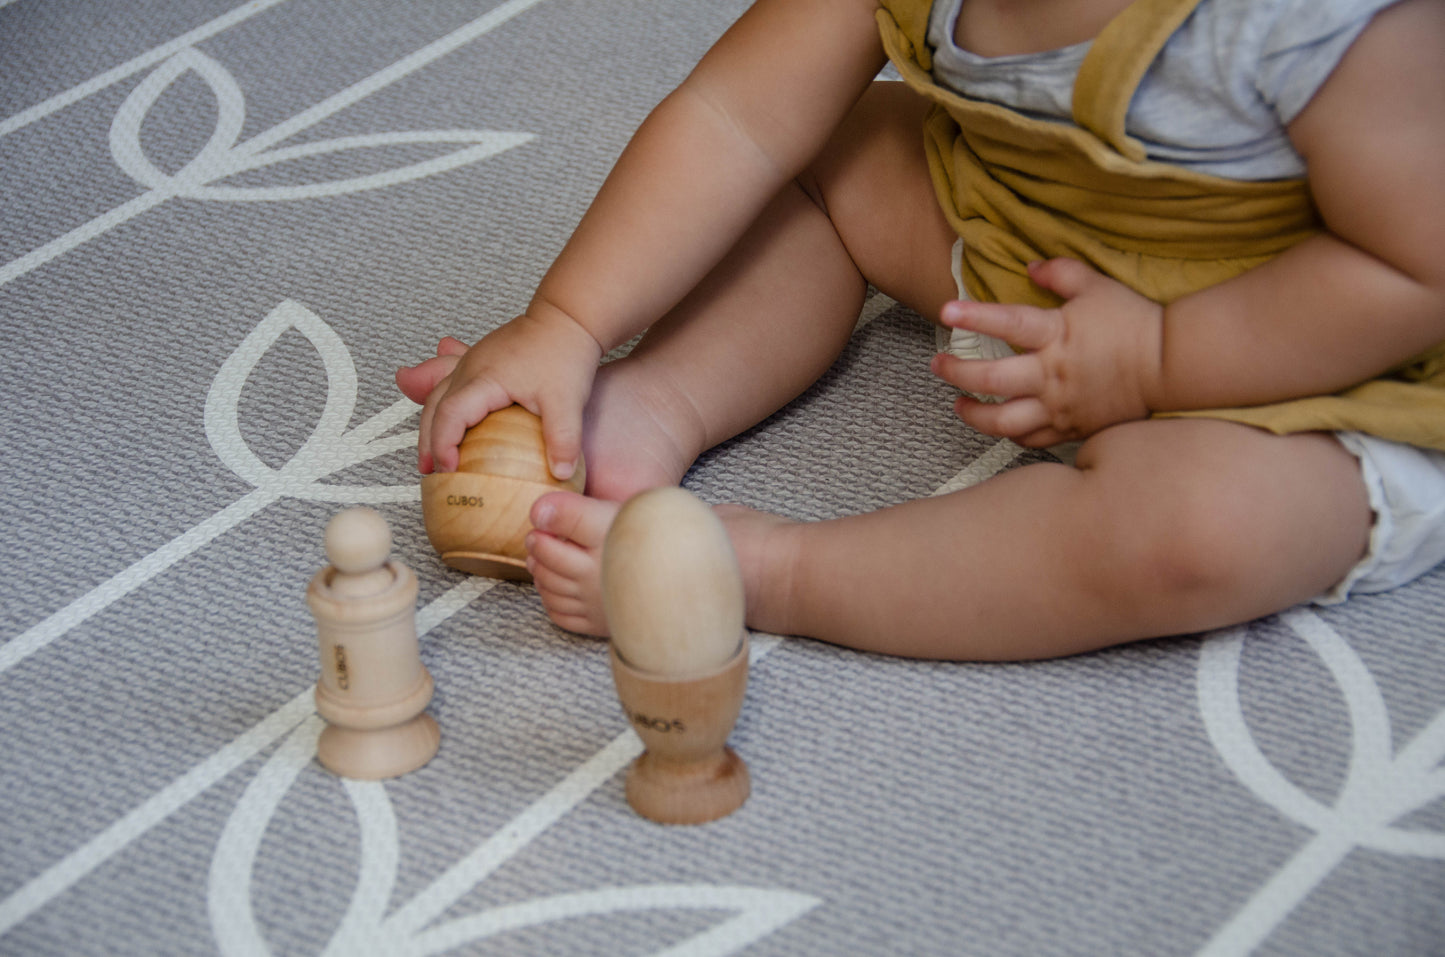 Baby happily playing with the Ball Bowl from the Cubos Ball Bowl Peg & Egg Cup set, enjoying the tactile experience and exploring its entertaining features."